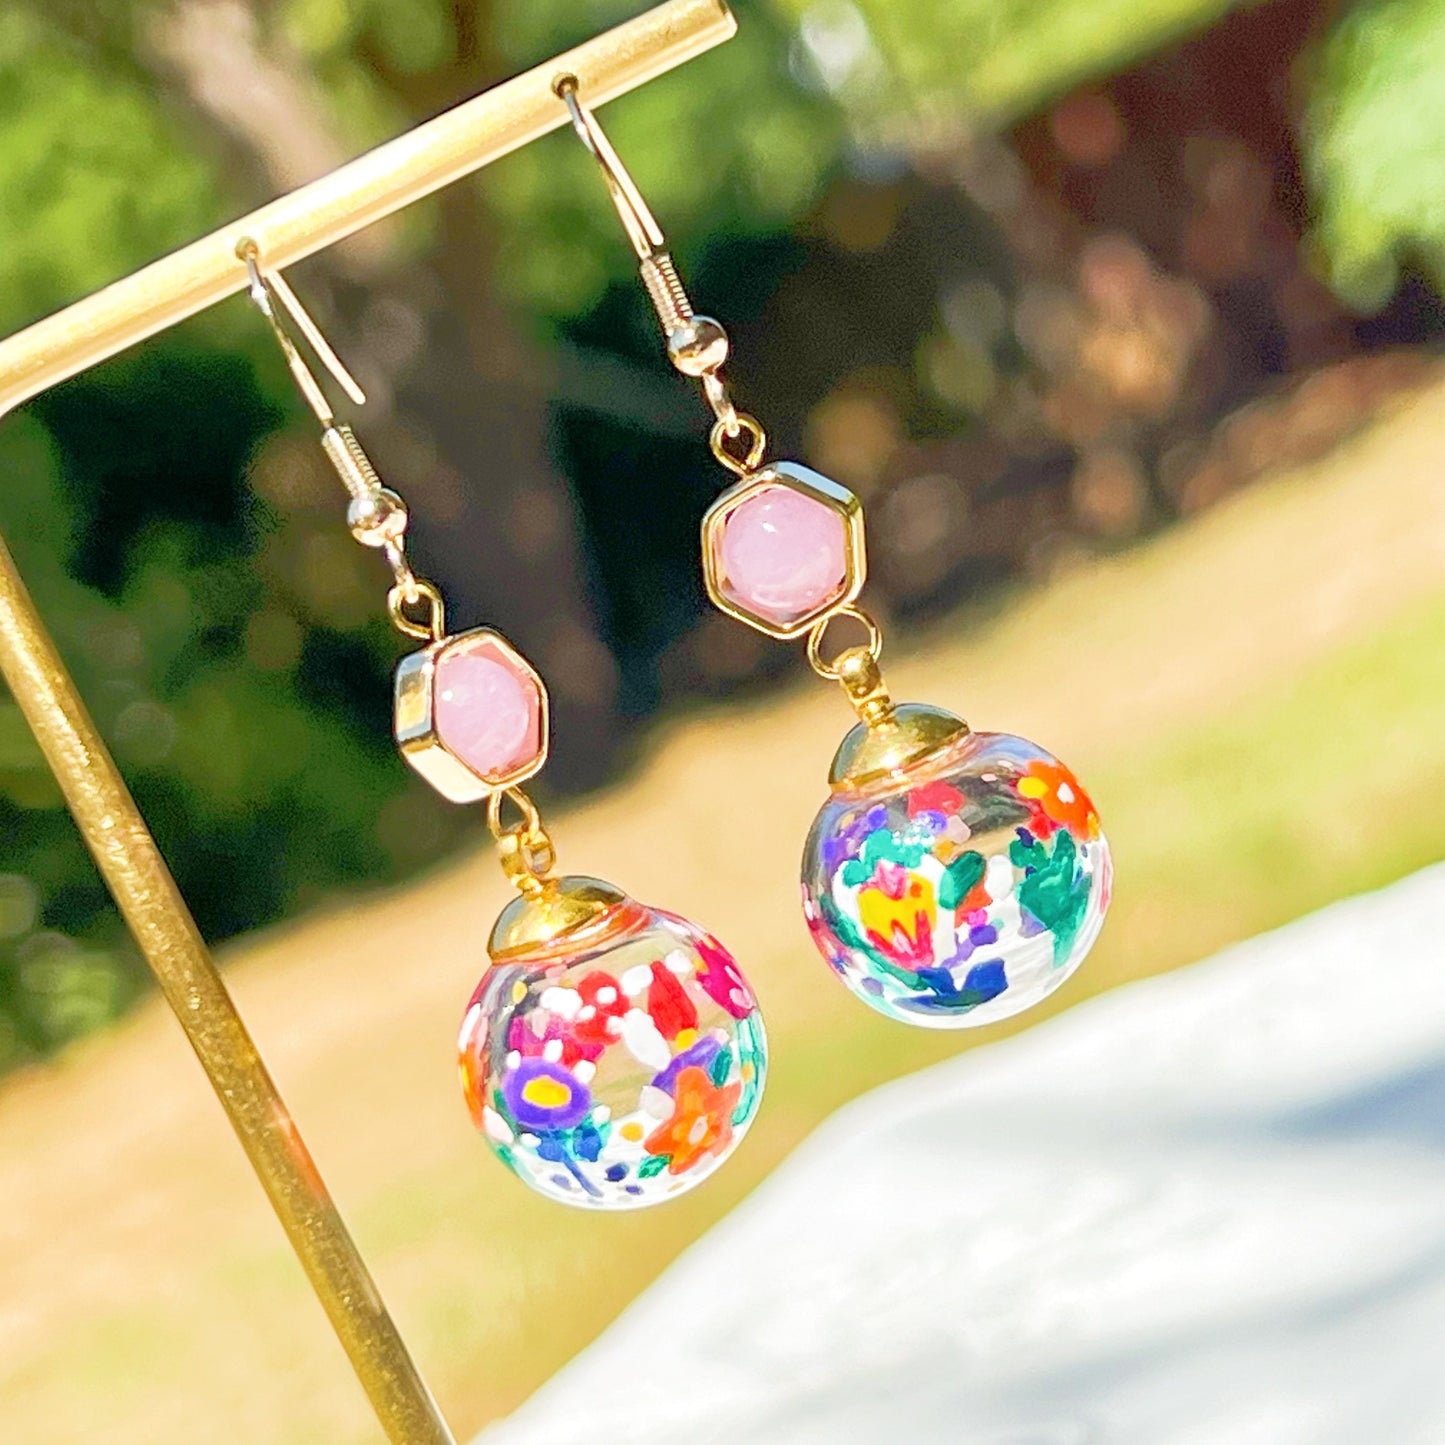 Hand Painted Flower on Glass Globe with Amethyst Drop Earrings-Ninaouity